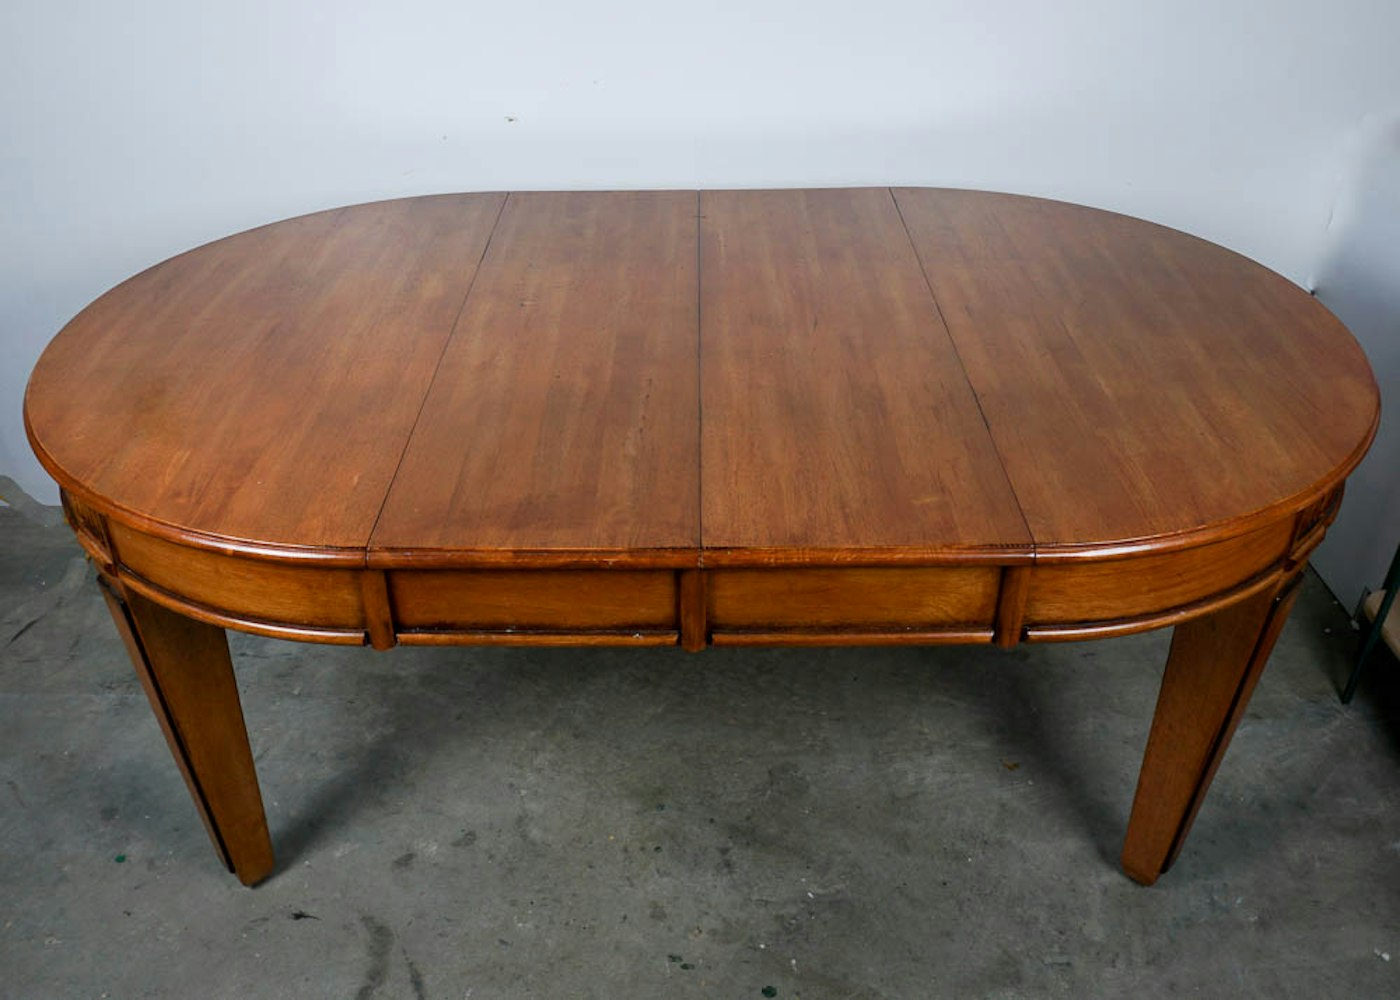 Mahogany Dining Table and Six Chairs | EBTH